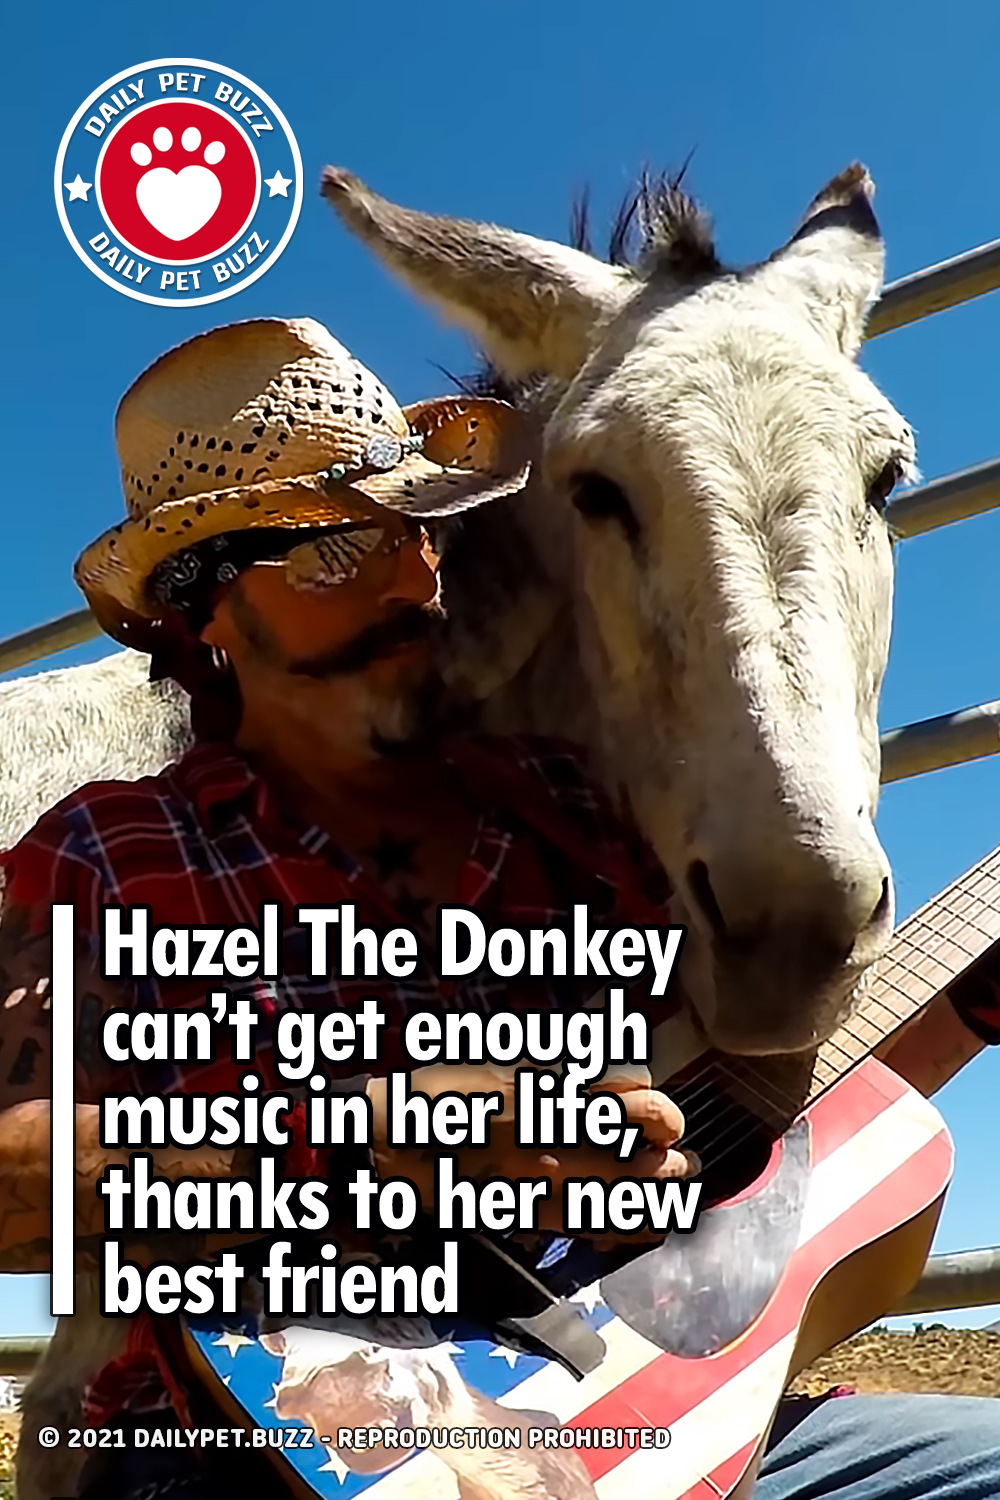 Hazel The Donkey can’t get enough music in her life, thanks to her new best friend